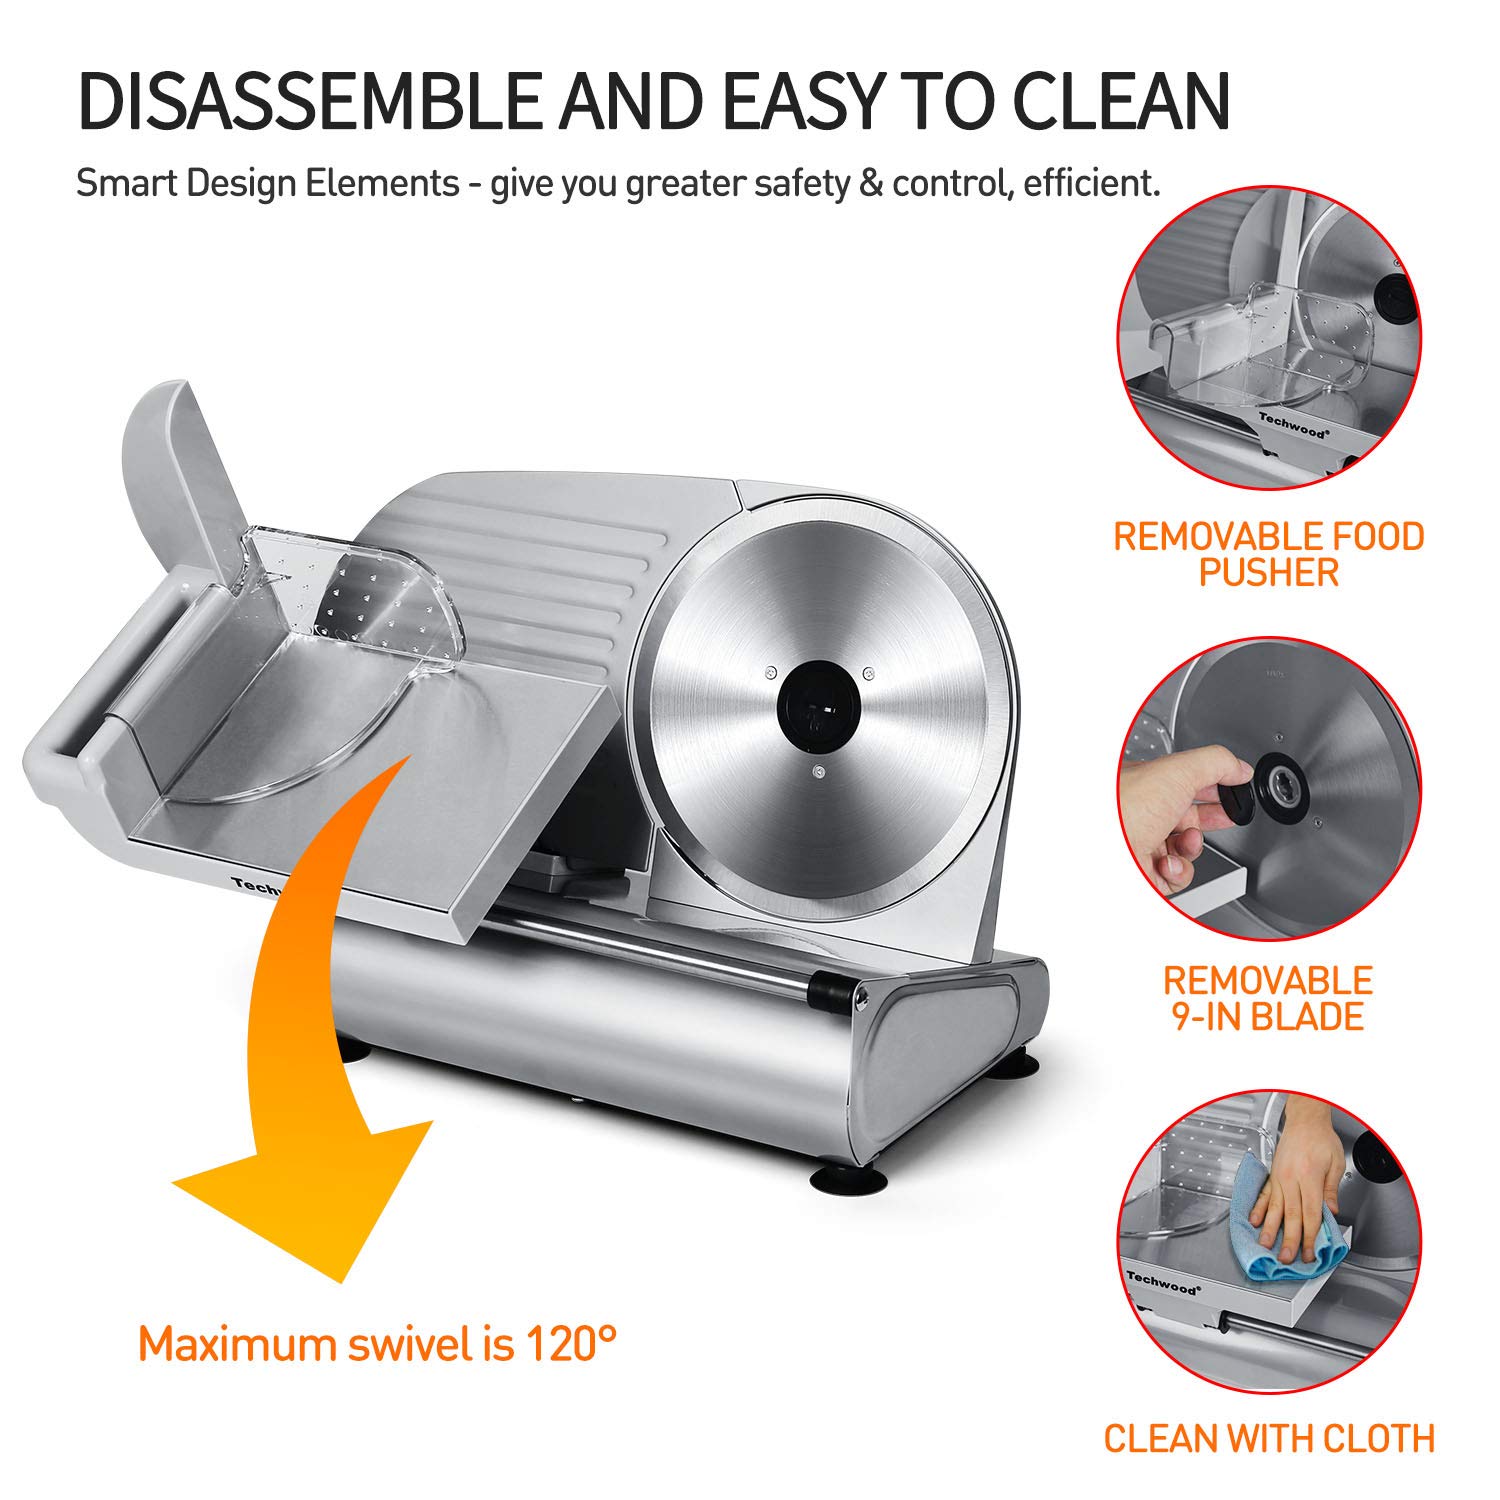 How to disassemble the slicer blade?